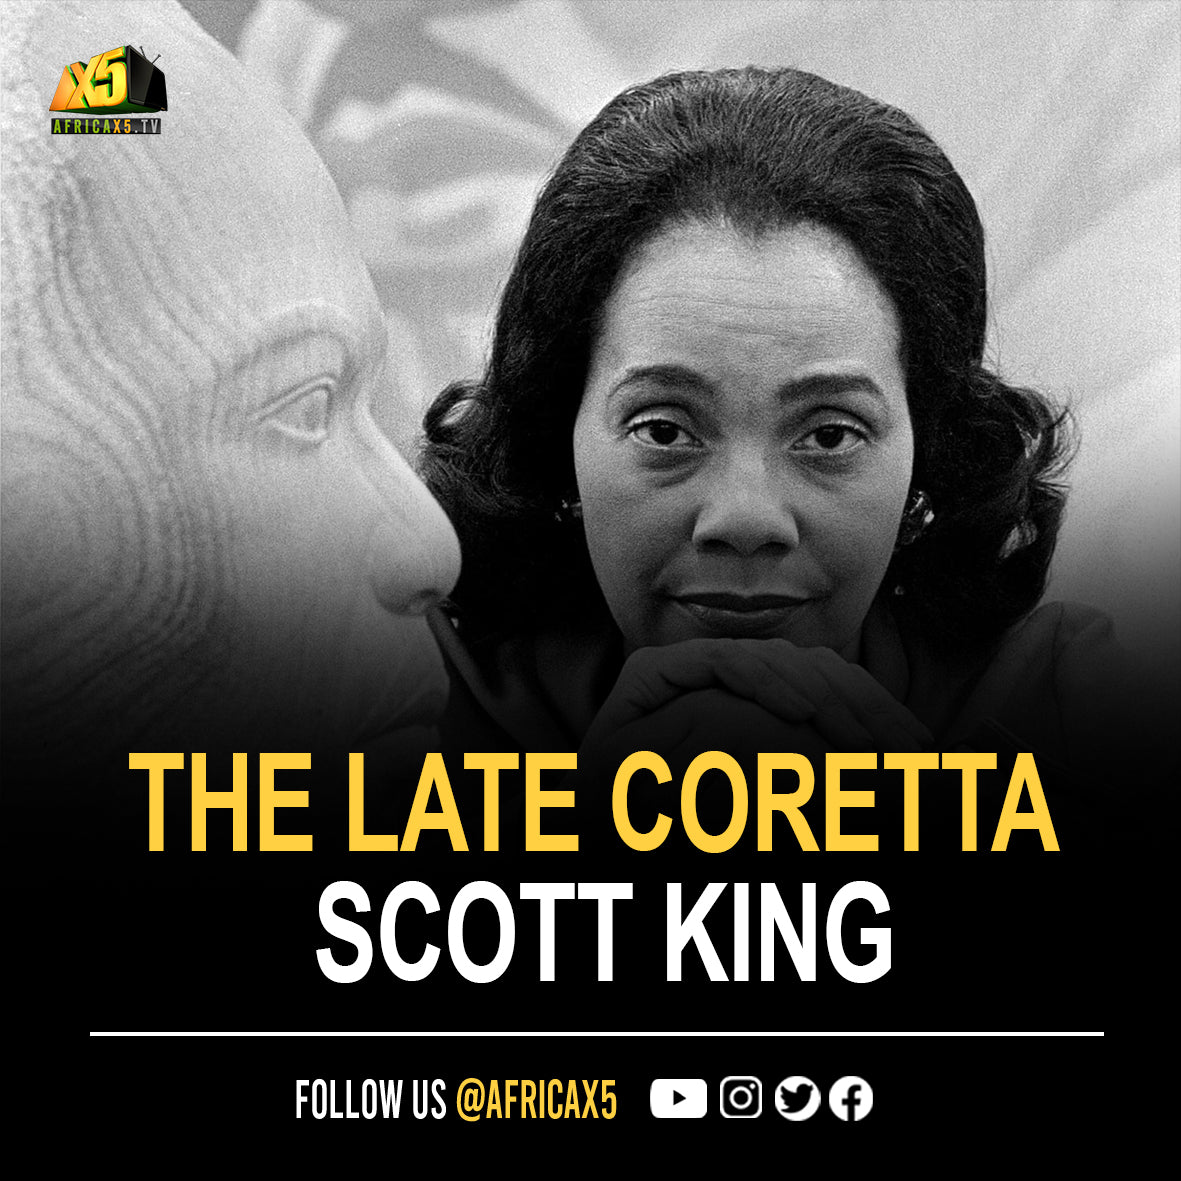 The late Coretta Scott King. She was an author, activist, civil rights leader and the wife of Martin Luther King Jr.